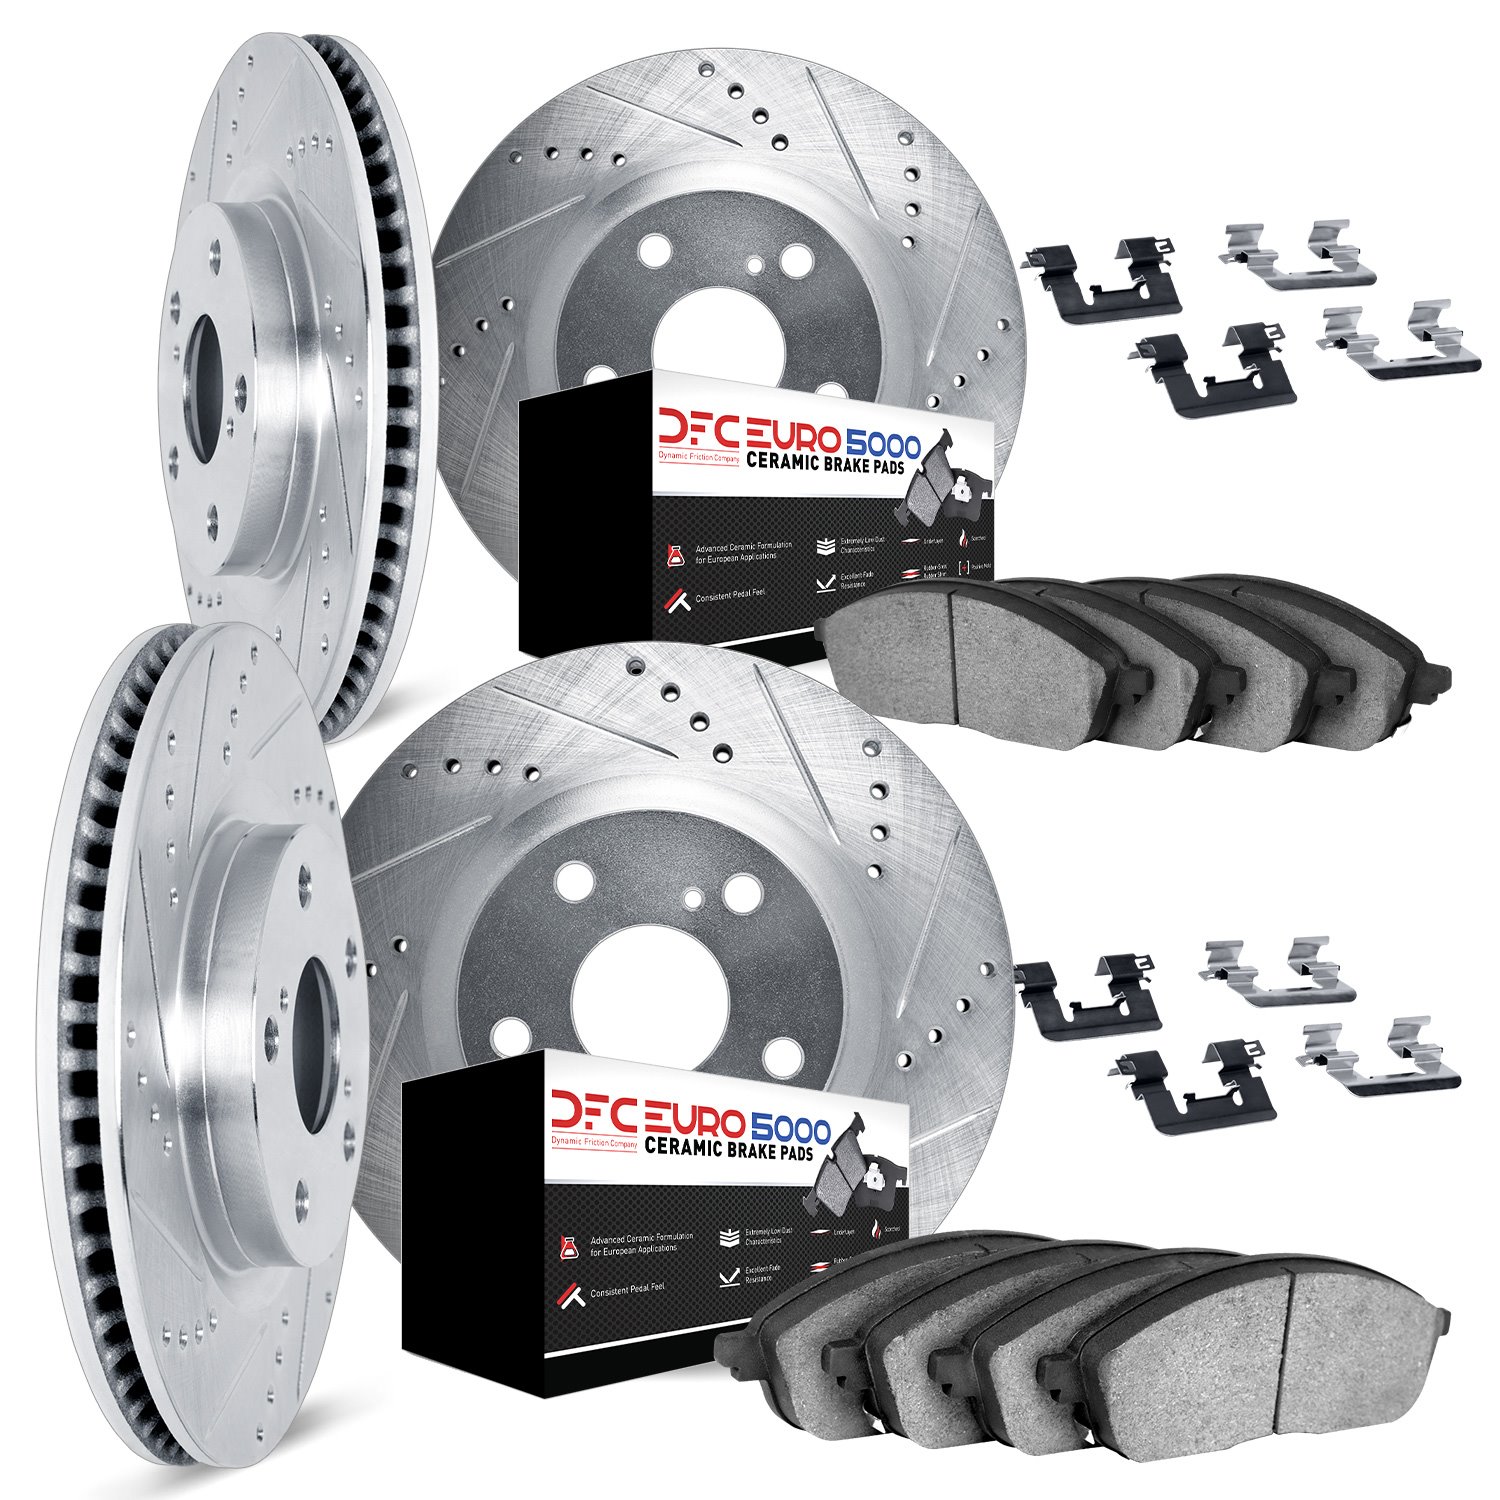 7614-31007 Drilled/Slotted Brake Rotors w/5000 Euro Ceramic Brake Pads Kit & Hardware [Silver], 1994-1995 BMW, Position: Front a